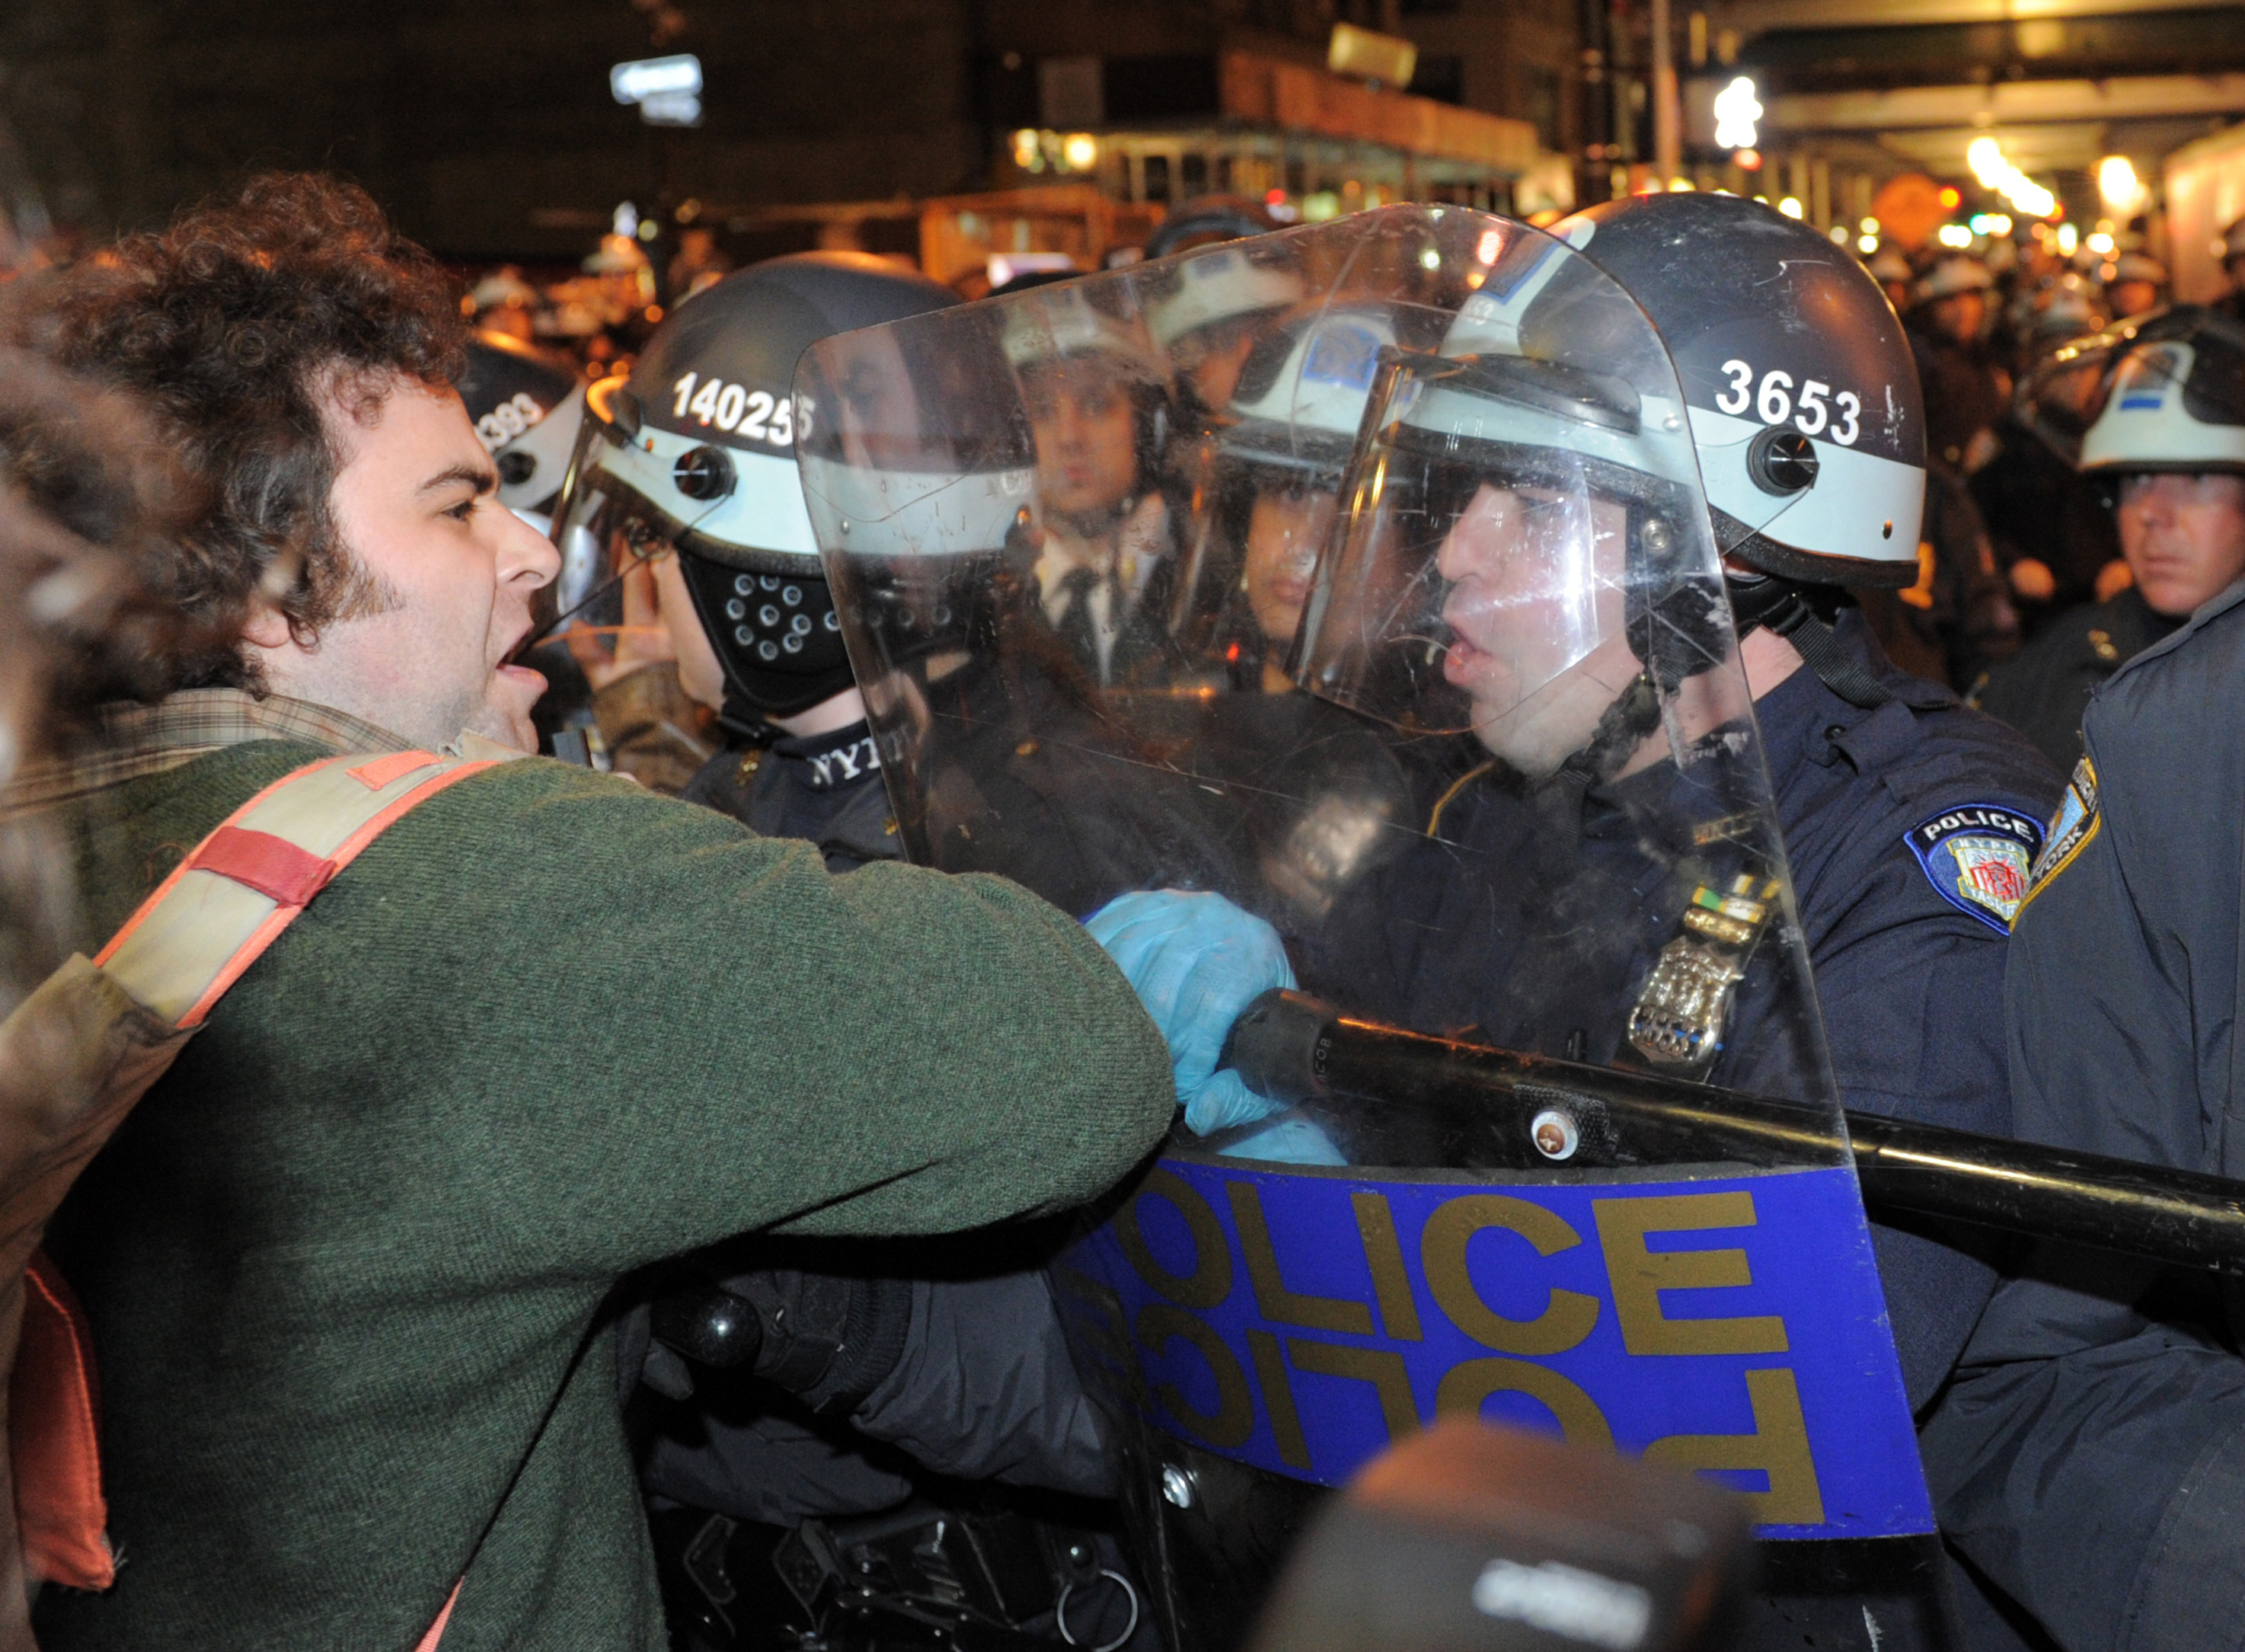 A man is confronted by NYPD in Zuccotti Park 